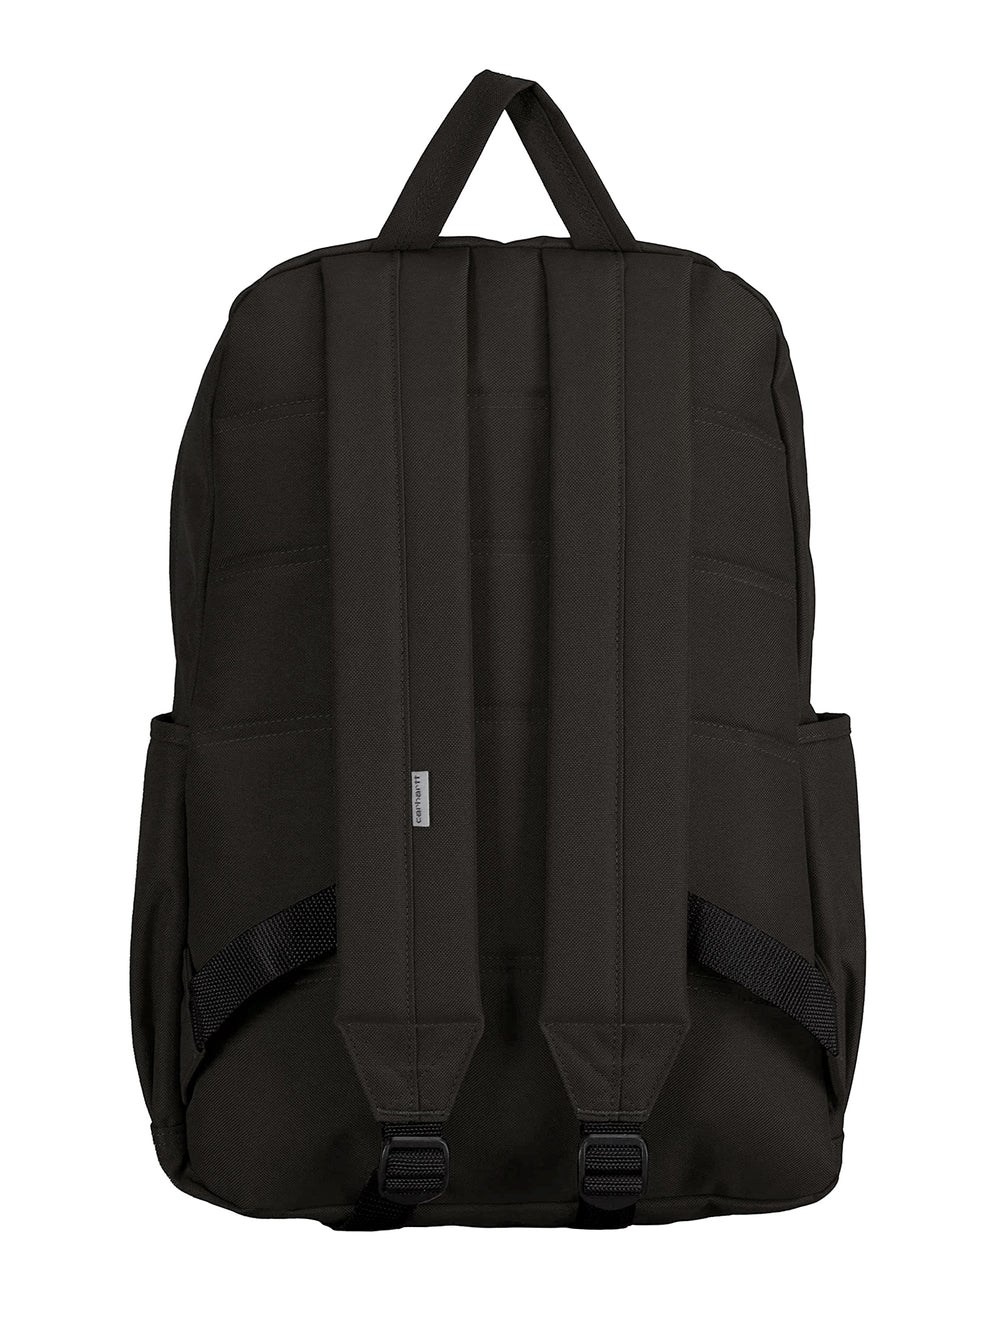 CARHARTT CLASSIC 25L LAPTOP BACKPACK - CLEARANCE